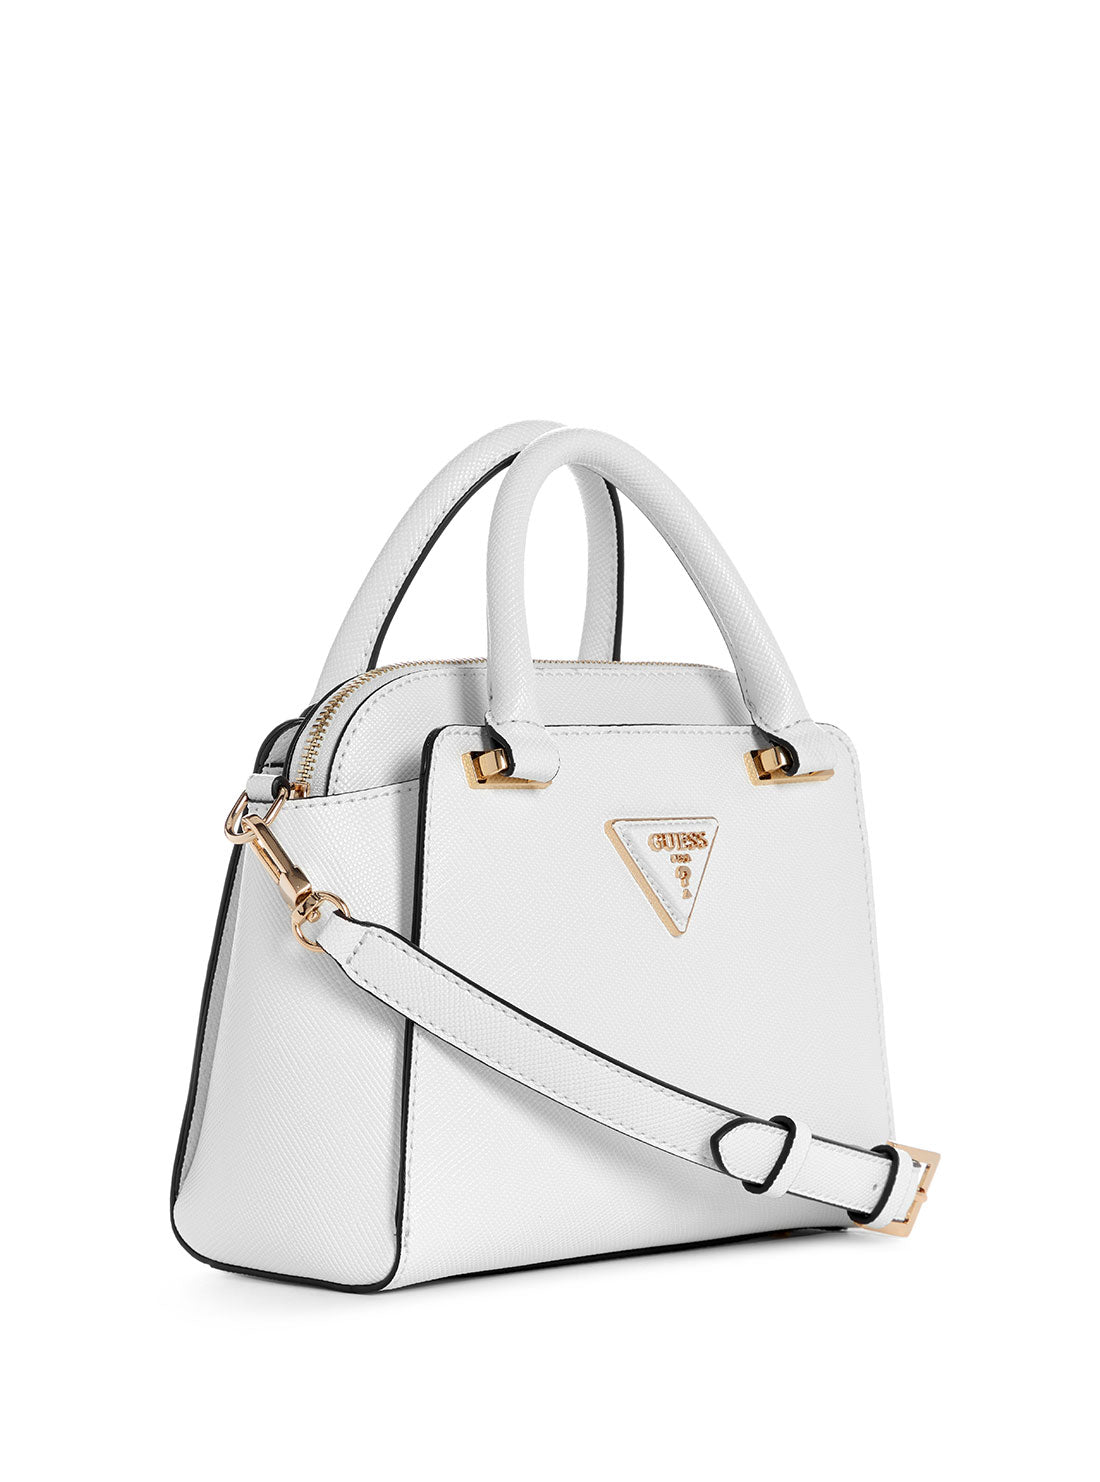 GUESS White Avis Small Satchel Bag side view